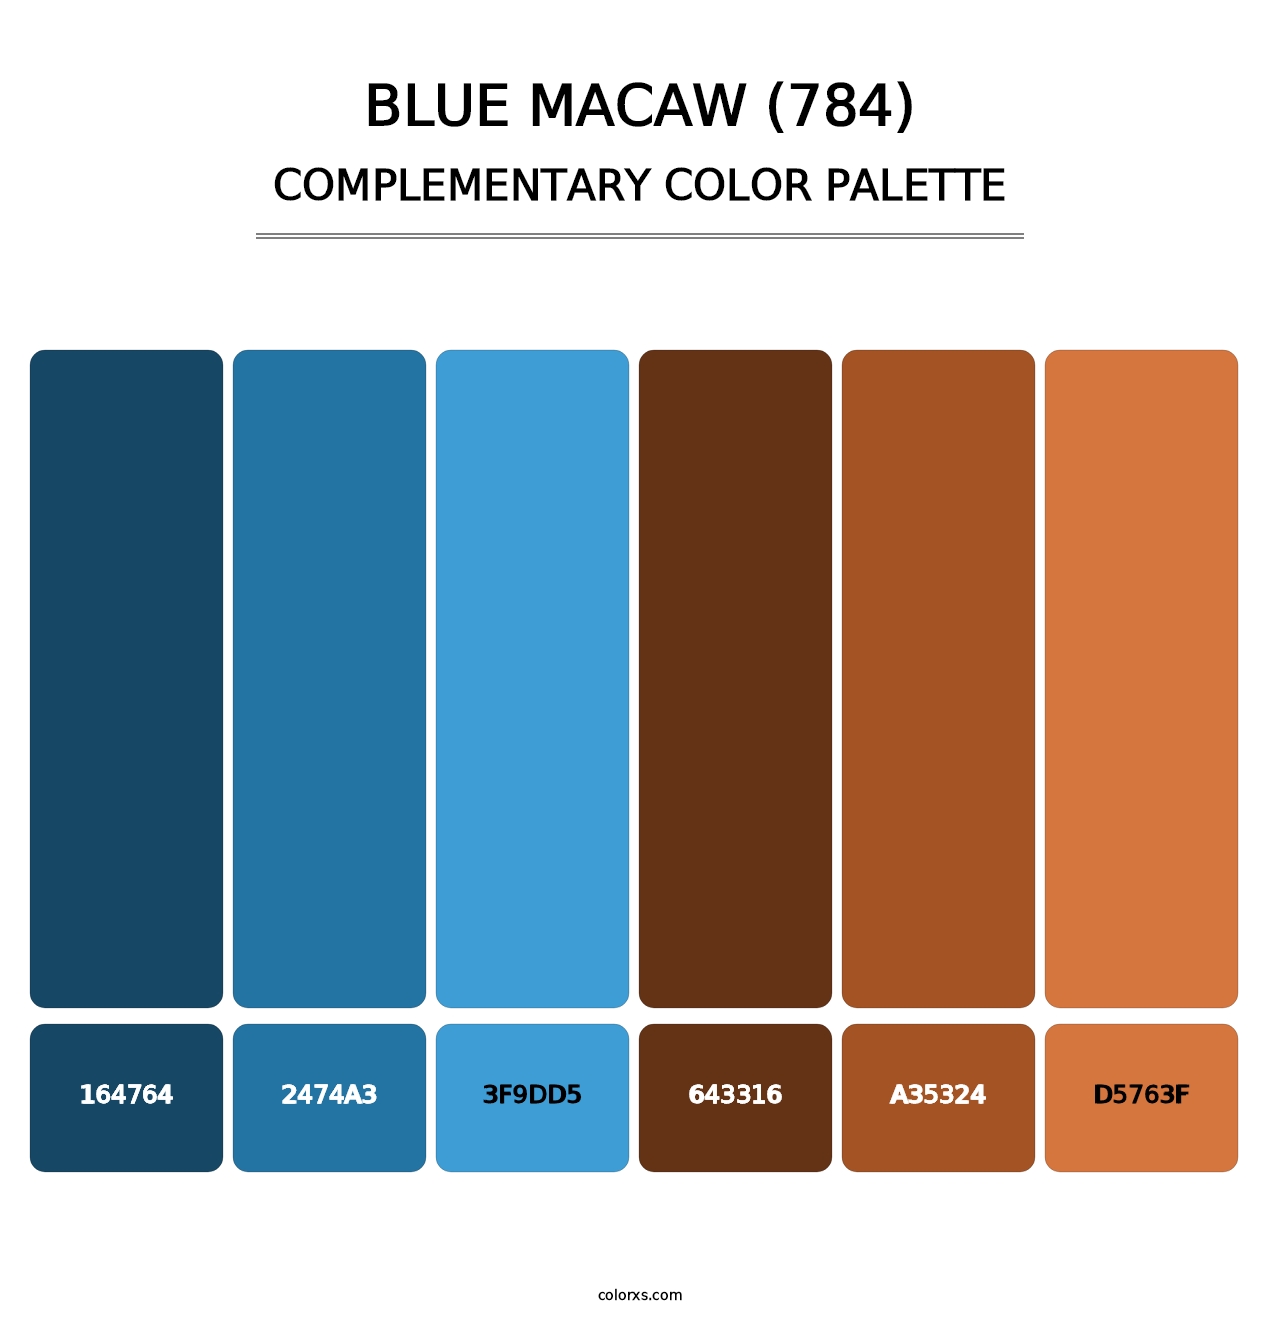 Blue Macaw (784) - Complementary Color Palette